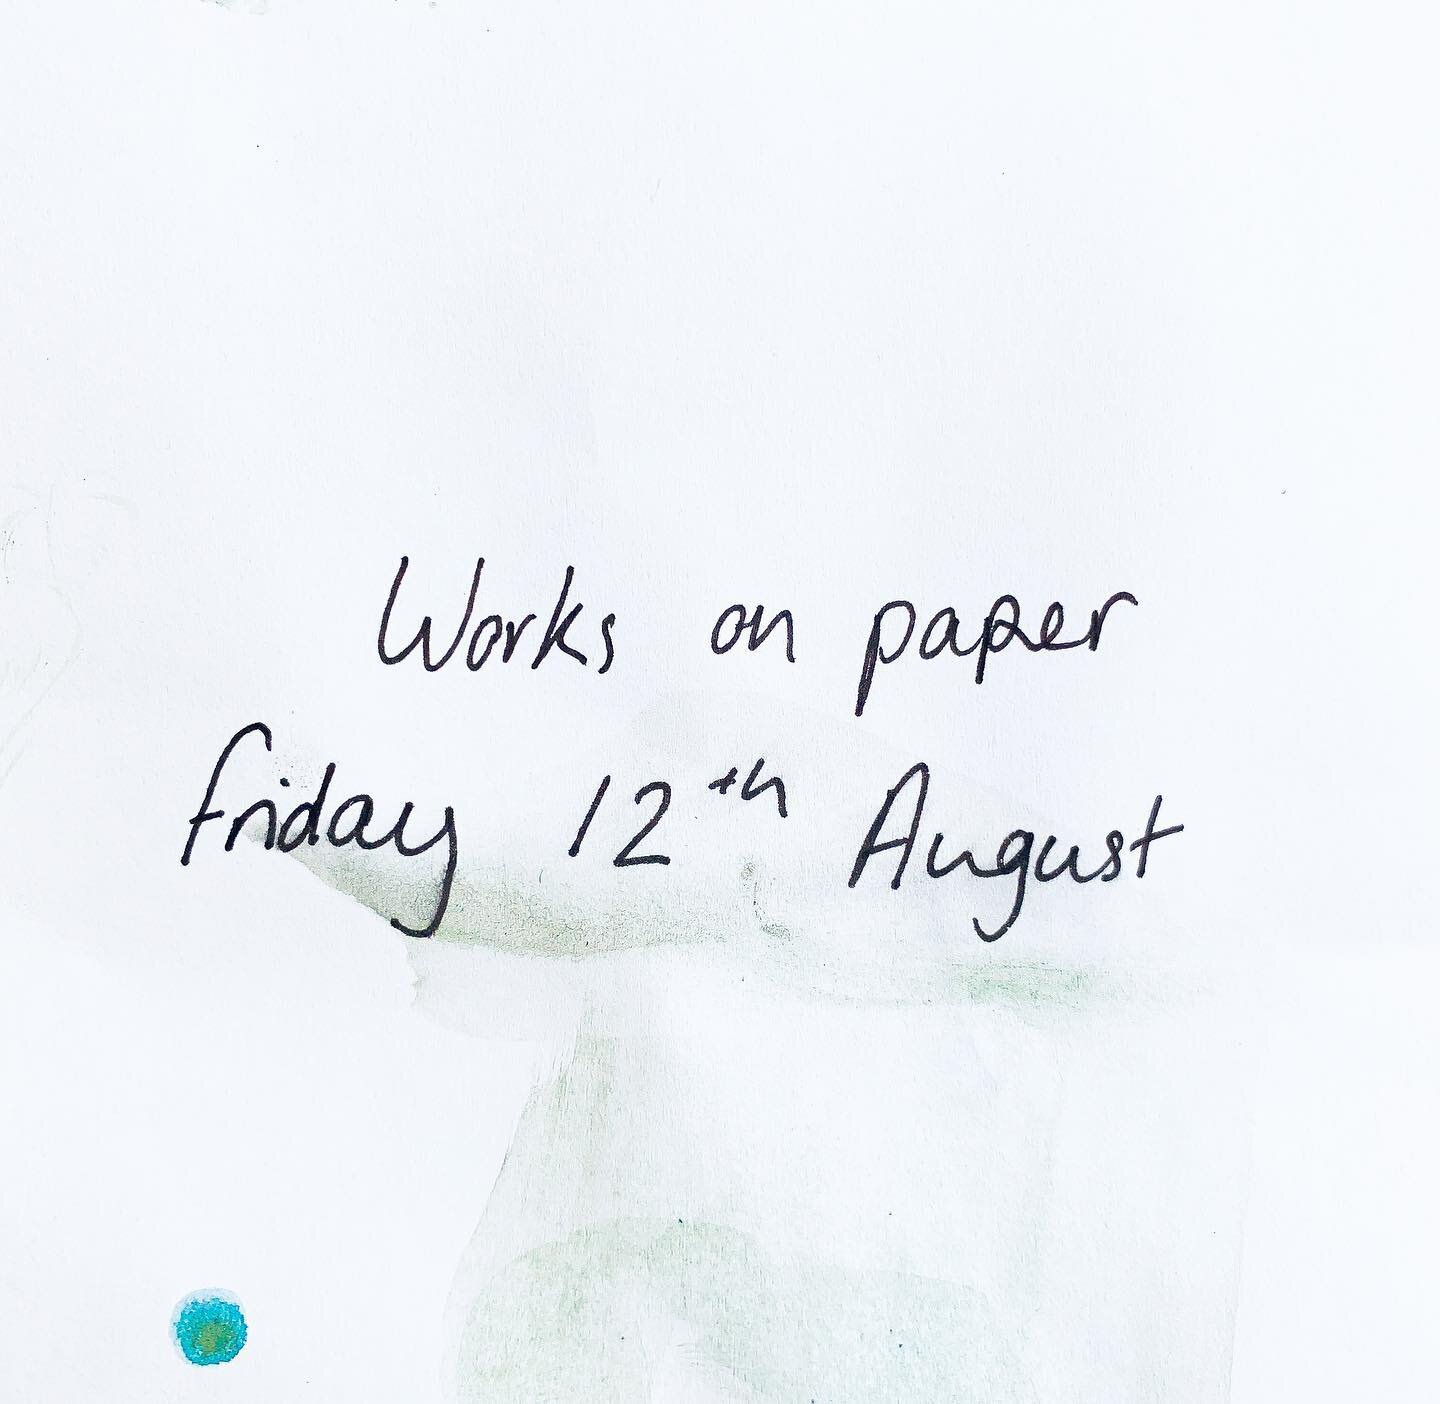 Works on Paper
Friday 12th August
www.alicefrancesart.com (link in bio)
.
I am pleased to be announcing that my Works on Paper will go live on my website at 10am this Friday! There will be 20+ small original paintings on handmade paper, all unframed.